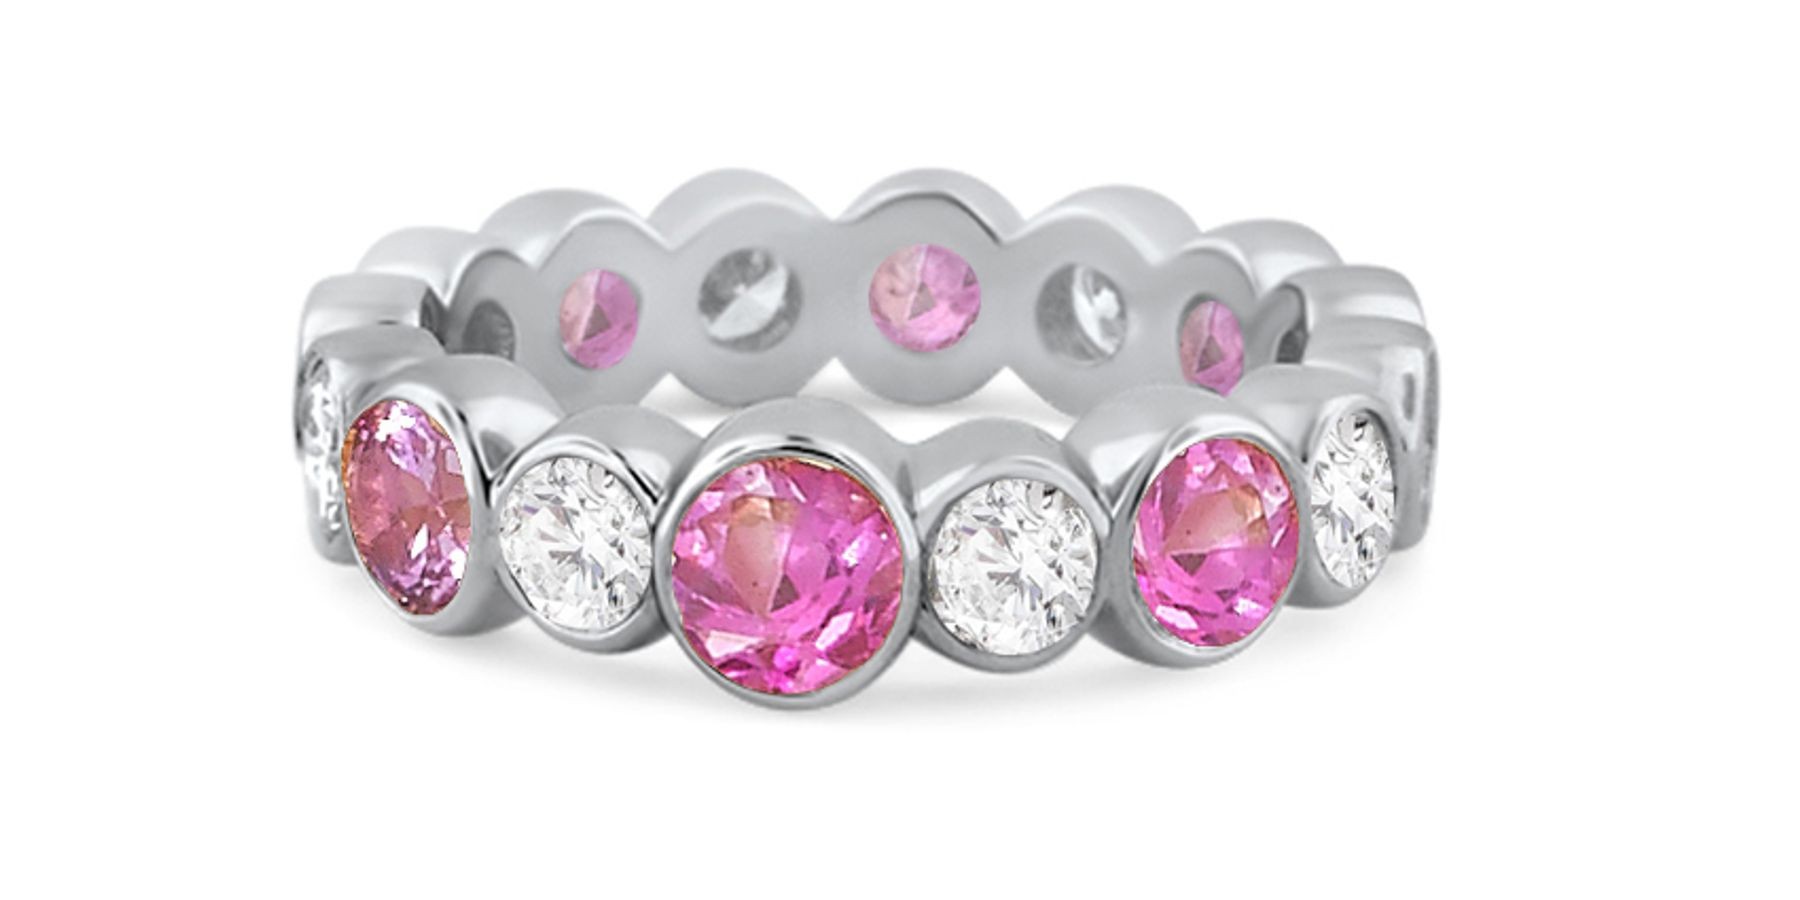 Shop Fine Quality Made To Order Round Bezel Set Diamond & Pink Sapphire Eternity Style Wedding & Anniversary Rings